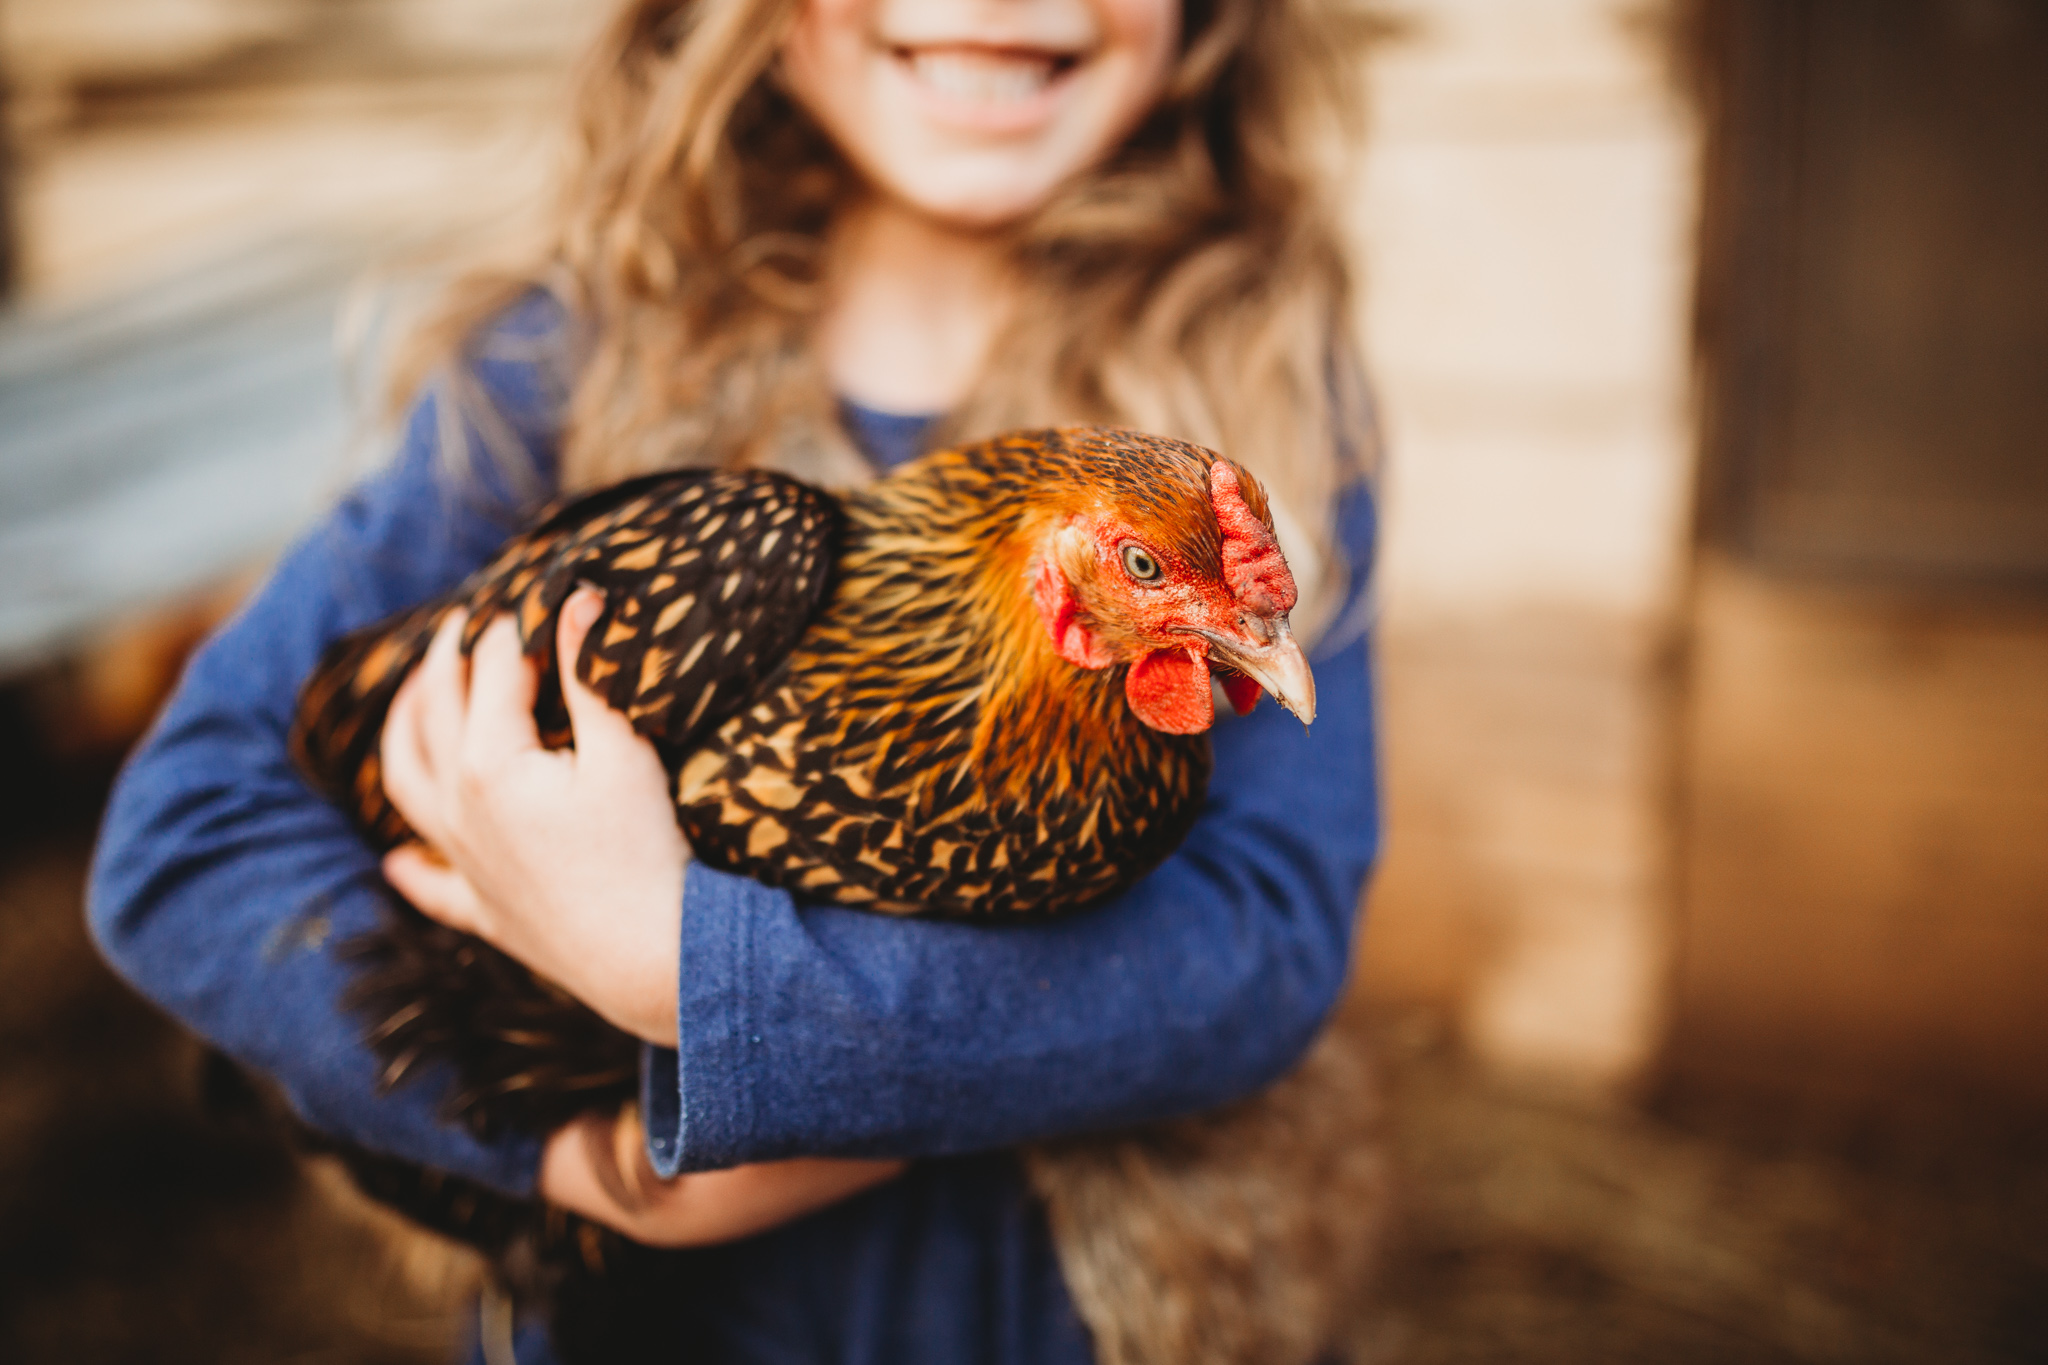 The Best Egg Laying Chickens That Are Kid-friendly